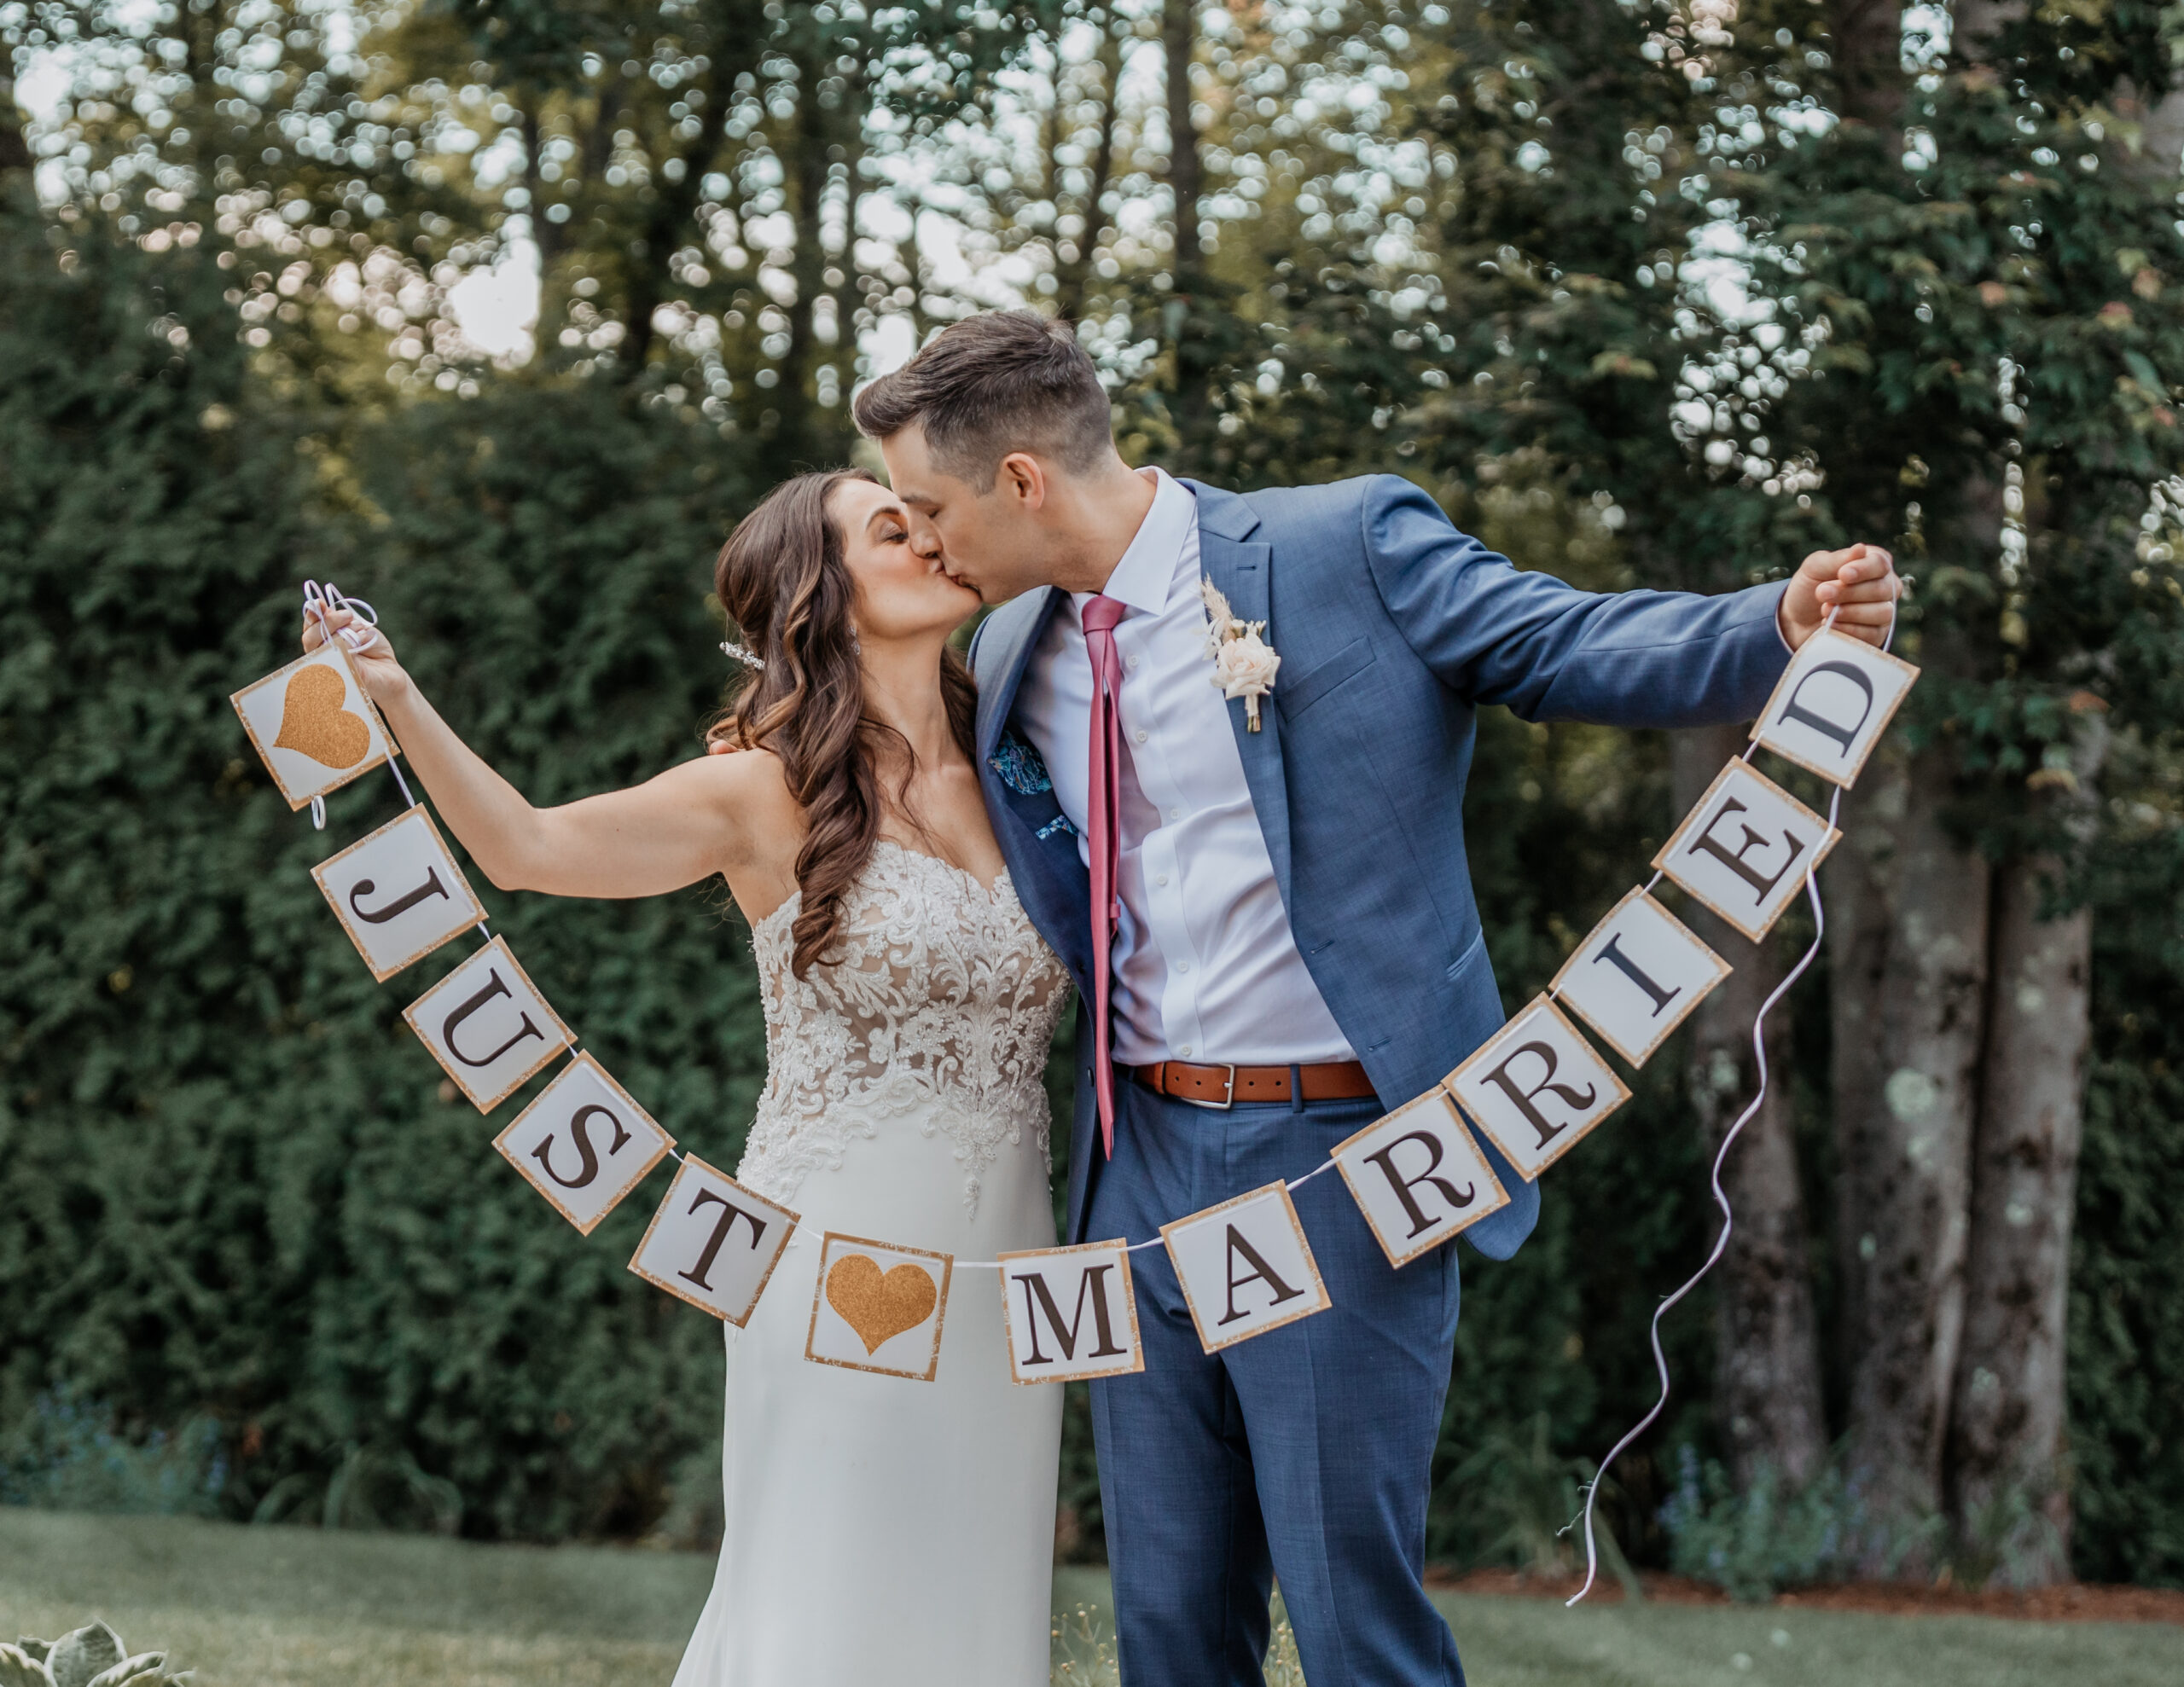 Bride and groom holding a Just Married banner at a wedding venue